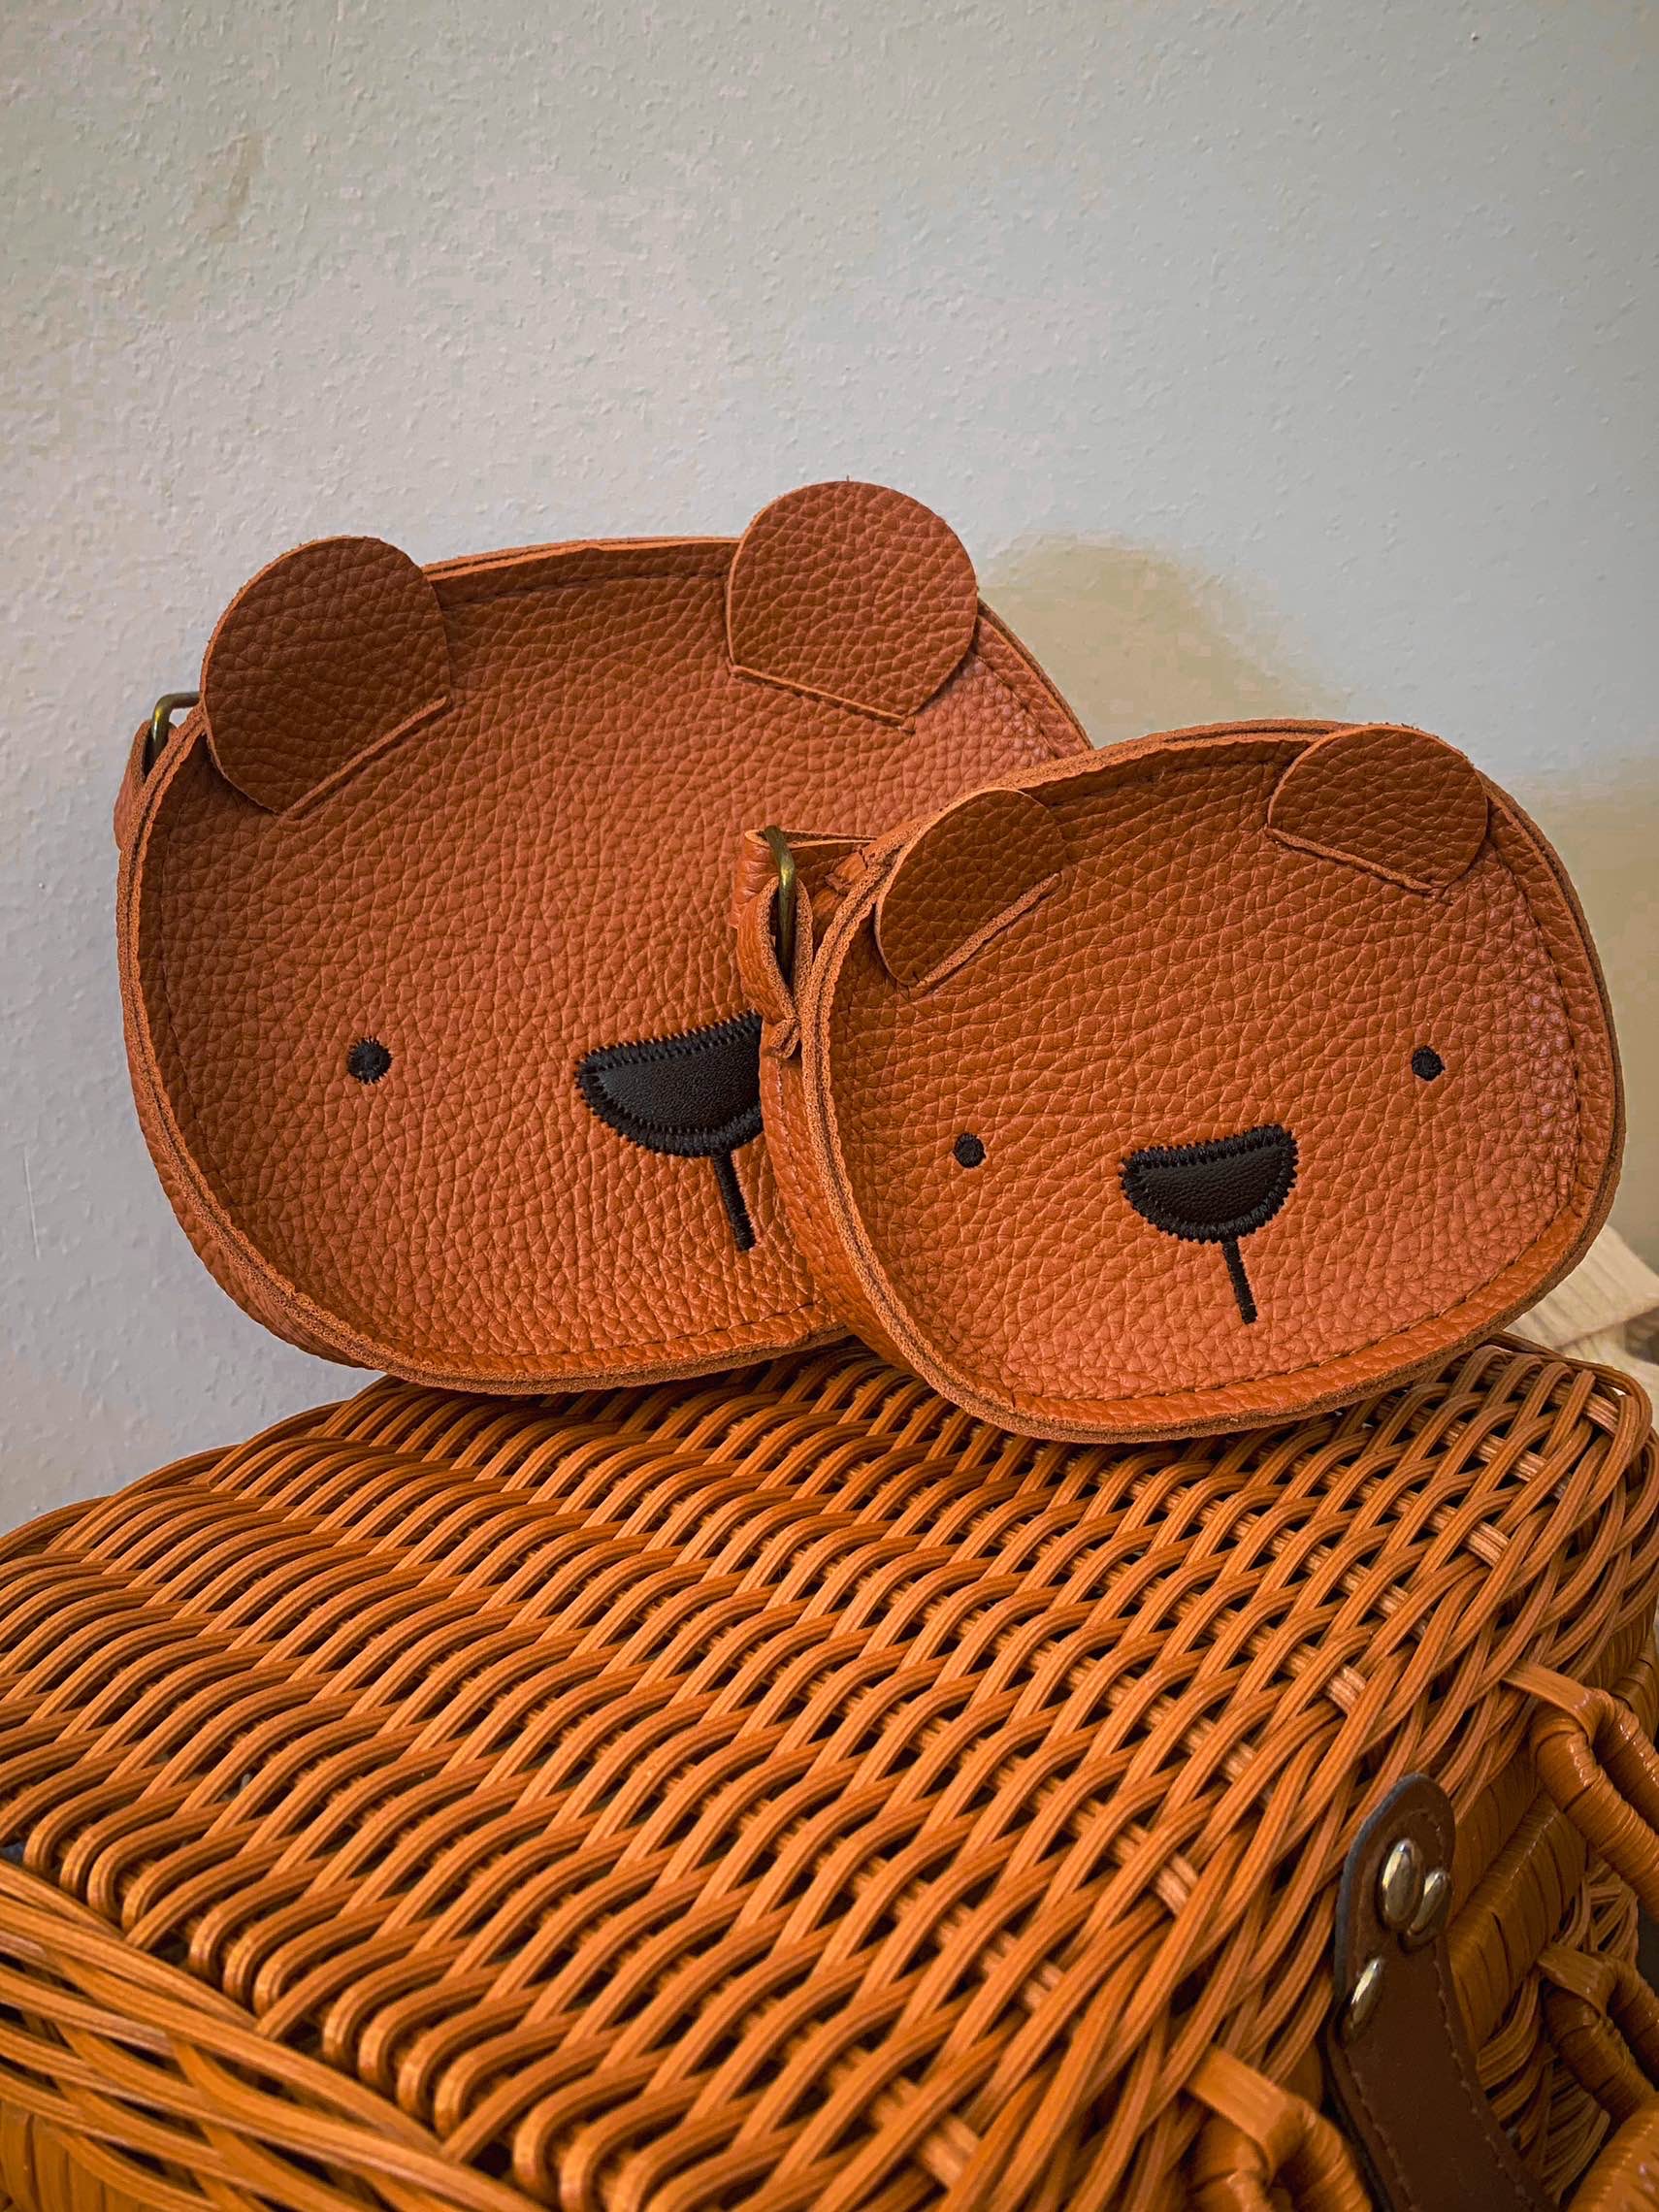 mommy and me mini coin purses in shape of a bear face in brown on a wicker basket